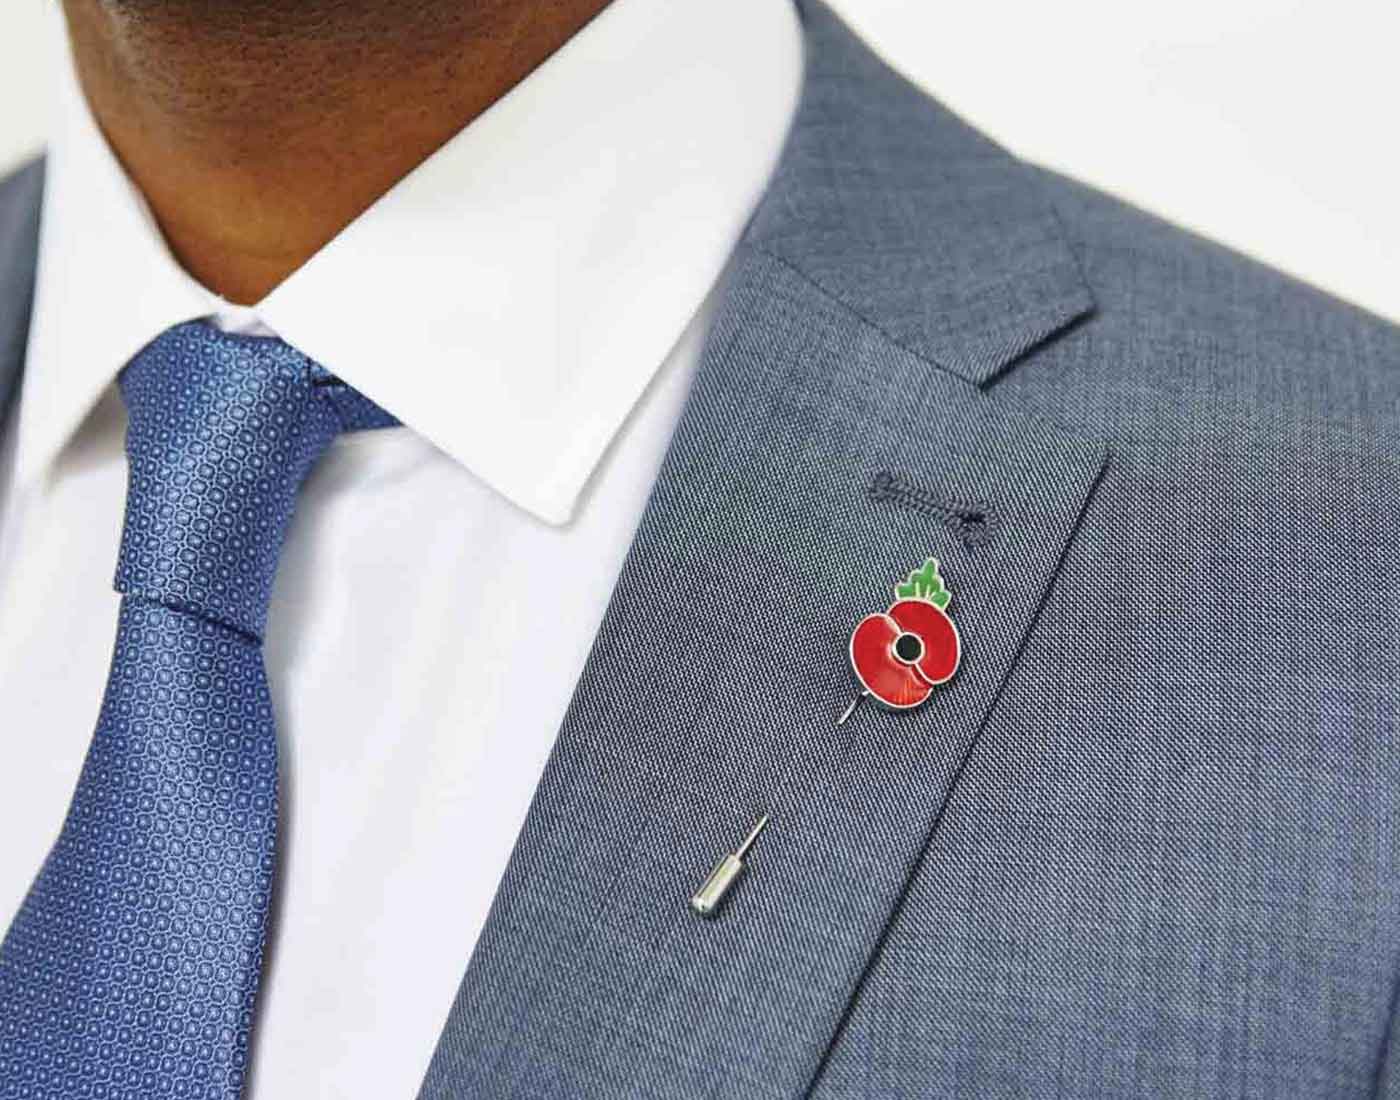 lapel pins | how to wear lapel pins | Alice Made This 